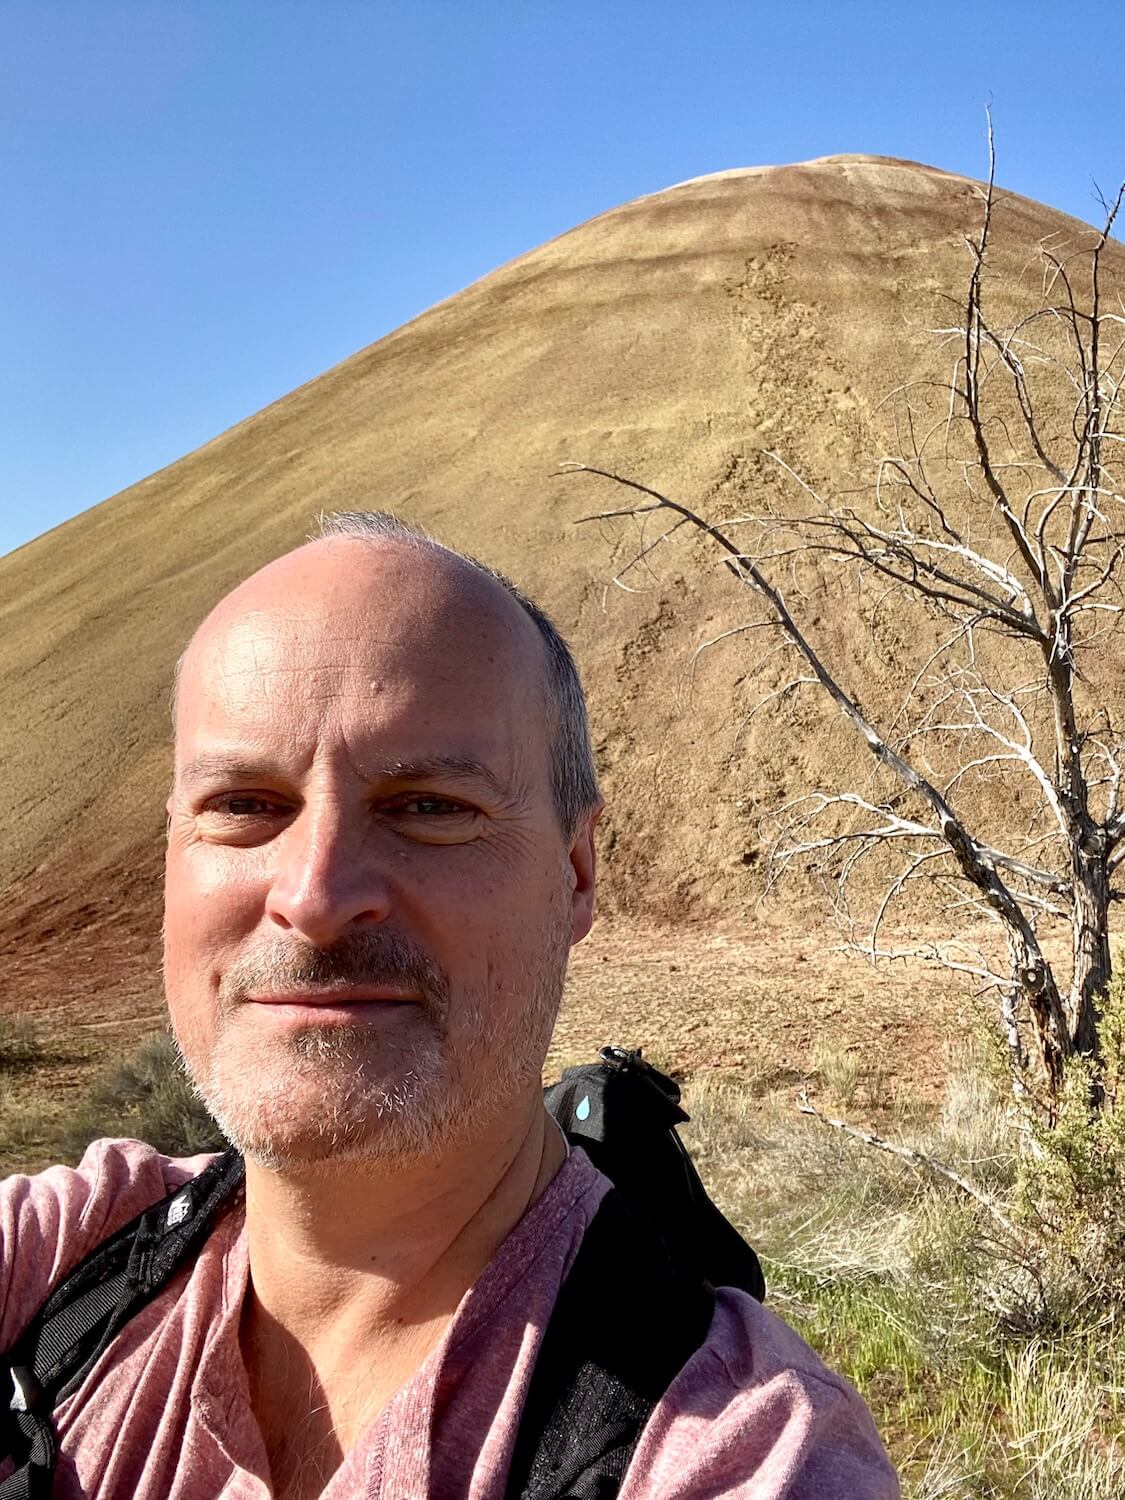 A selfie of Matthew Kessi in front of the yellow side of the large anthill-like mound.  He's smiling in front of a dormant tree with white branches and the sky above is blue. 